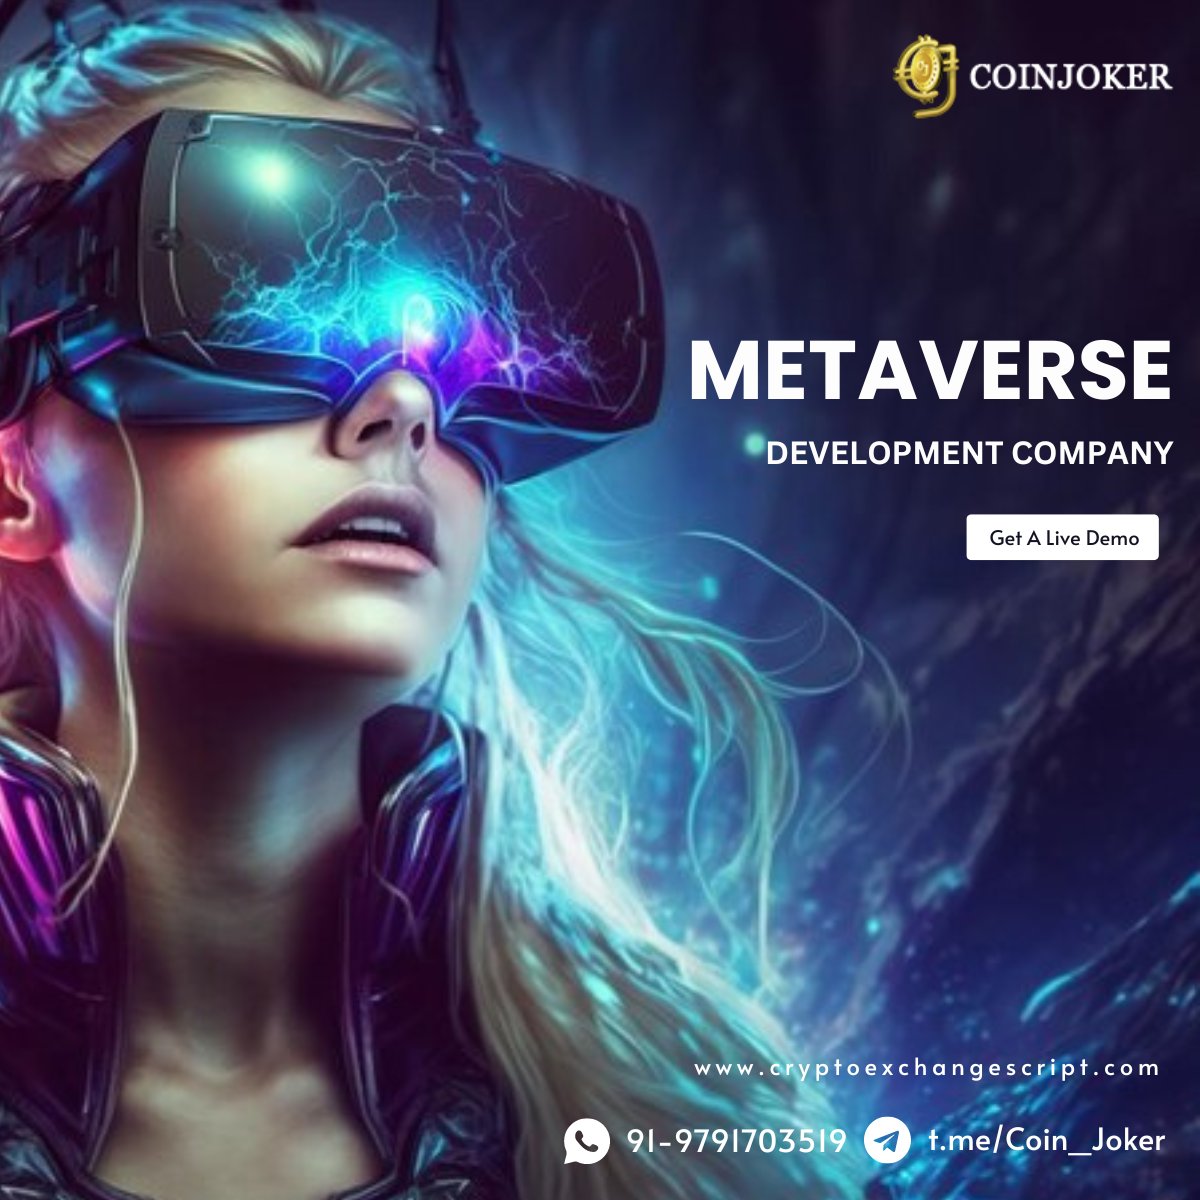 🚀Embark on a journey into the future with us! 

Stay tuned for an exclusive sneak peek into what's coming next! >> tinyurl.com/53r3s85b

#Metaverse #VirtualReality #AugmentedReality #VRDevelopment #ARDevelopment #DigitalWorlds #ImmersiveTech #VirtualExperience #FutureTech